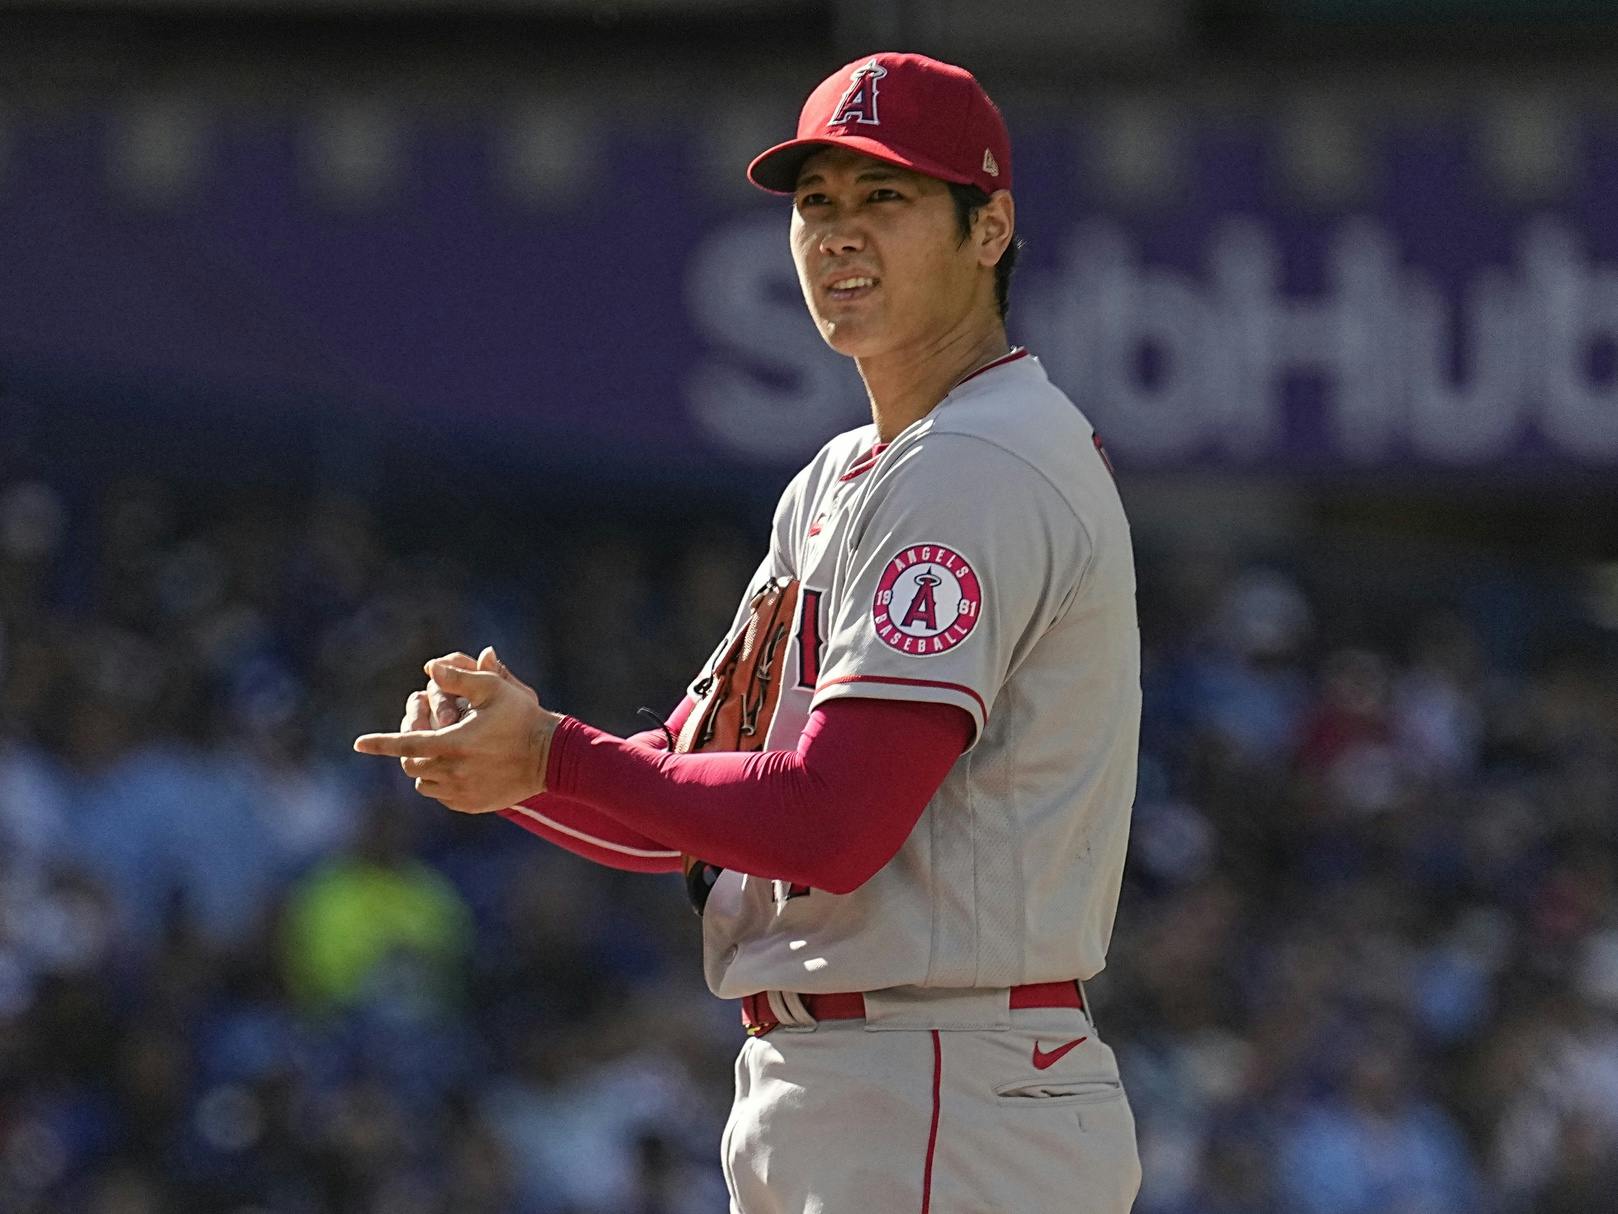 L.A. Angels pitcher Shohei Ohtani out for the season